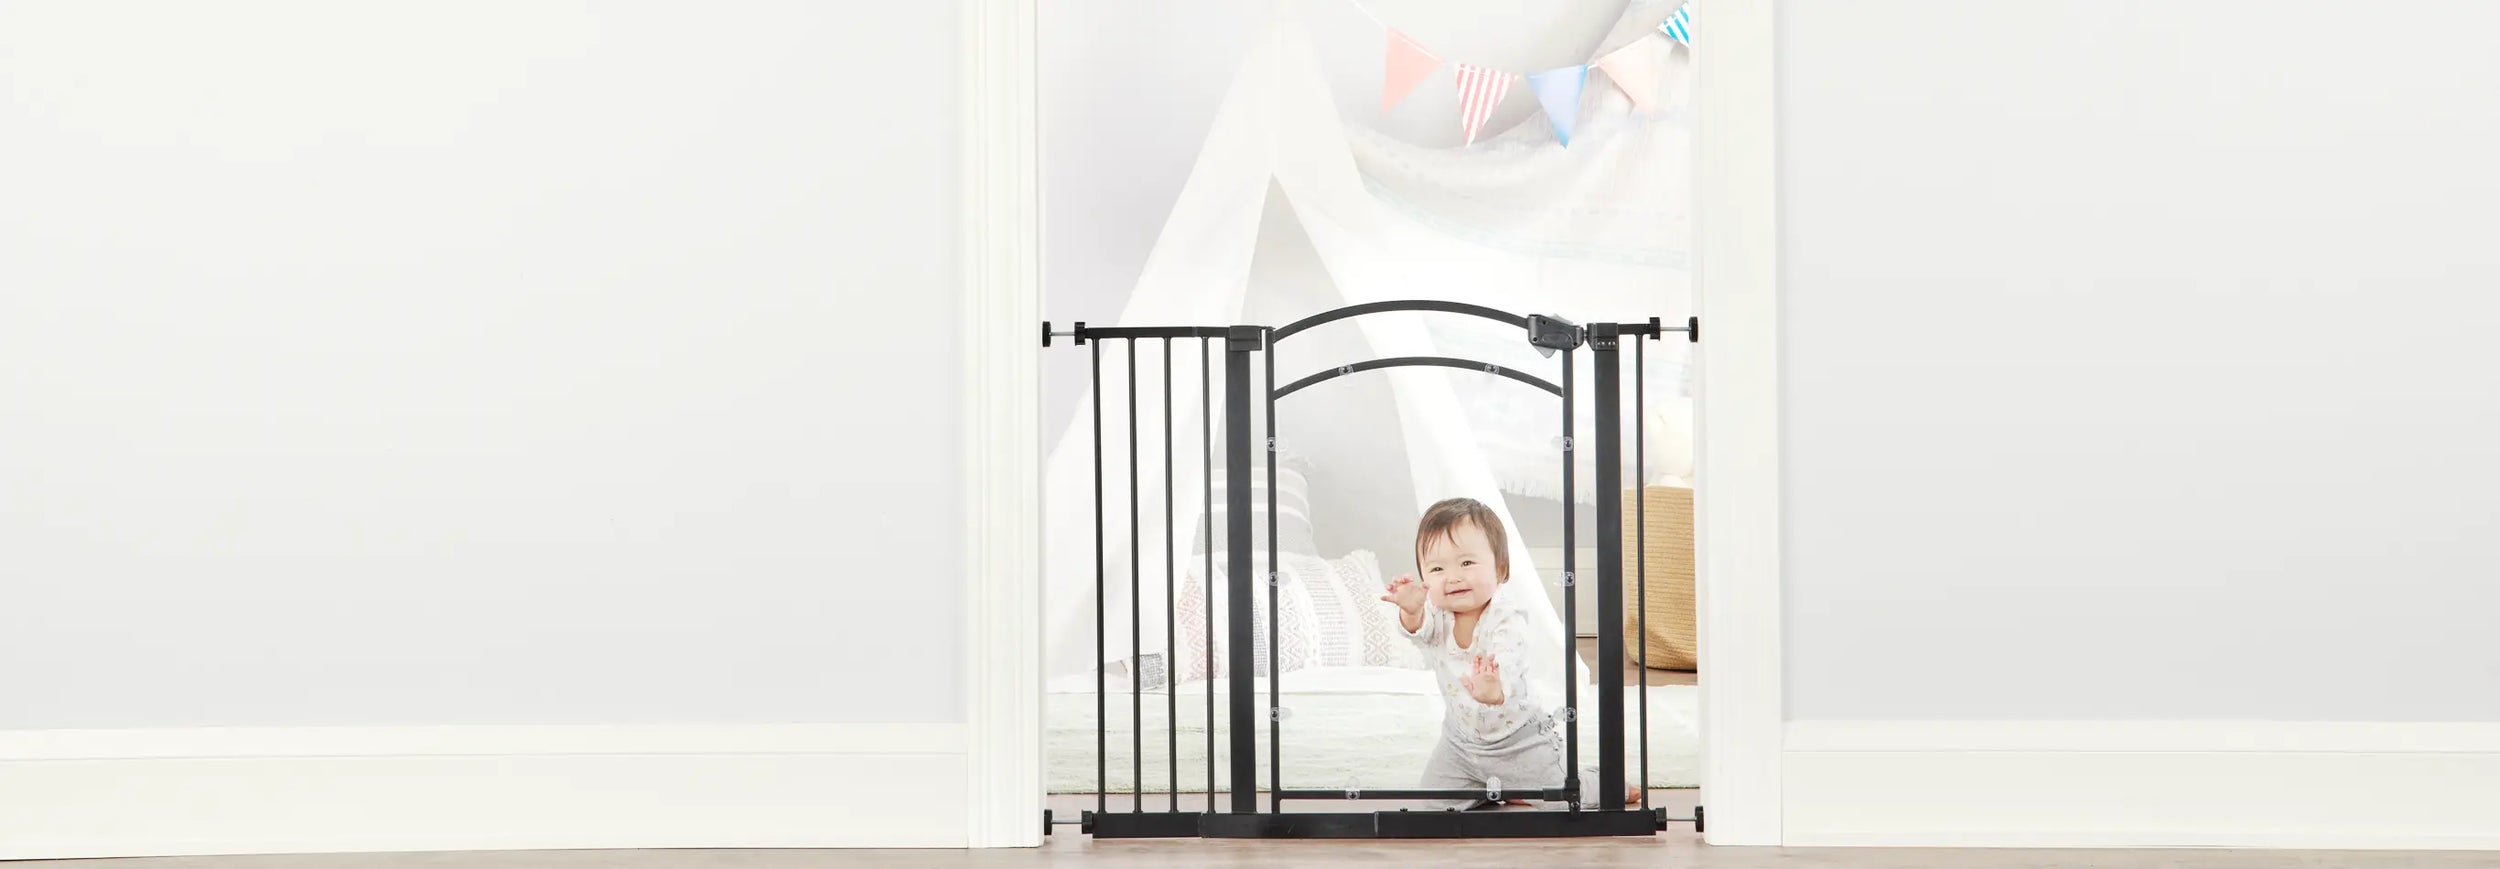 Baby Smiling Behind In Sight Safety Gate